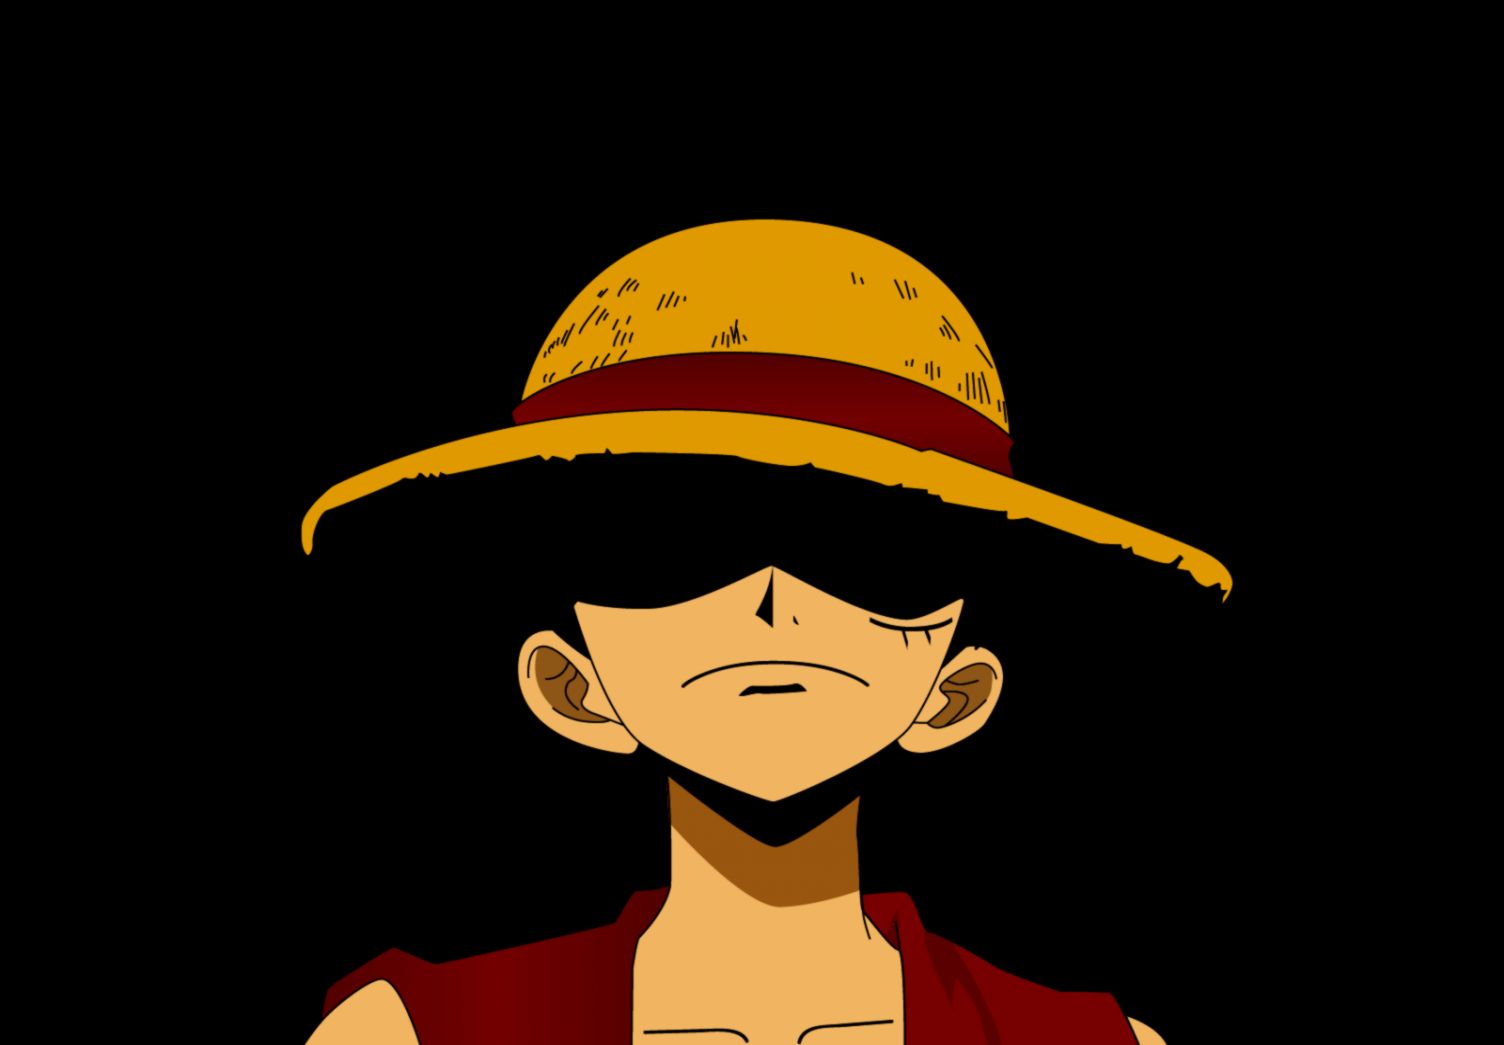 Free Download One Piece Wallpaper Wide Wallpapers 1504x1045 For Your Desktop Mobile Tablet Explore 27 Luffy Smile Wallpaper Luffy Smile Wallpaper Luffy Wallpapers Luffy Wallpaper